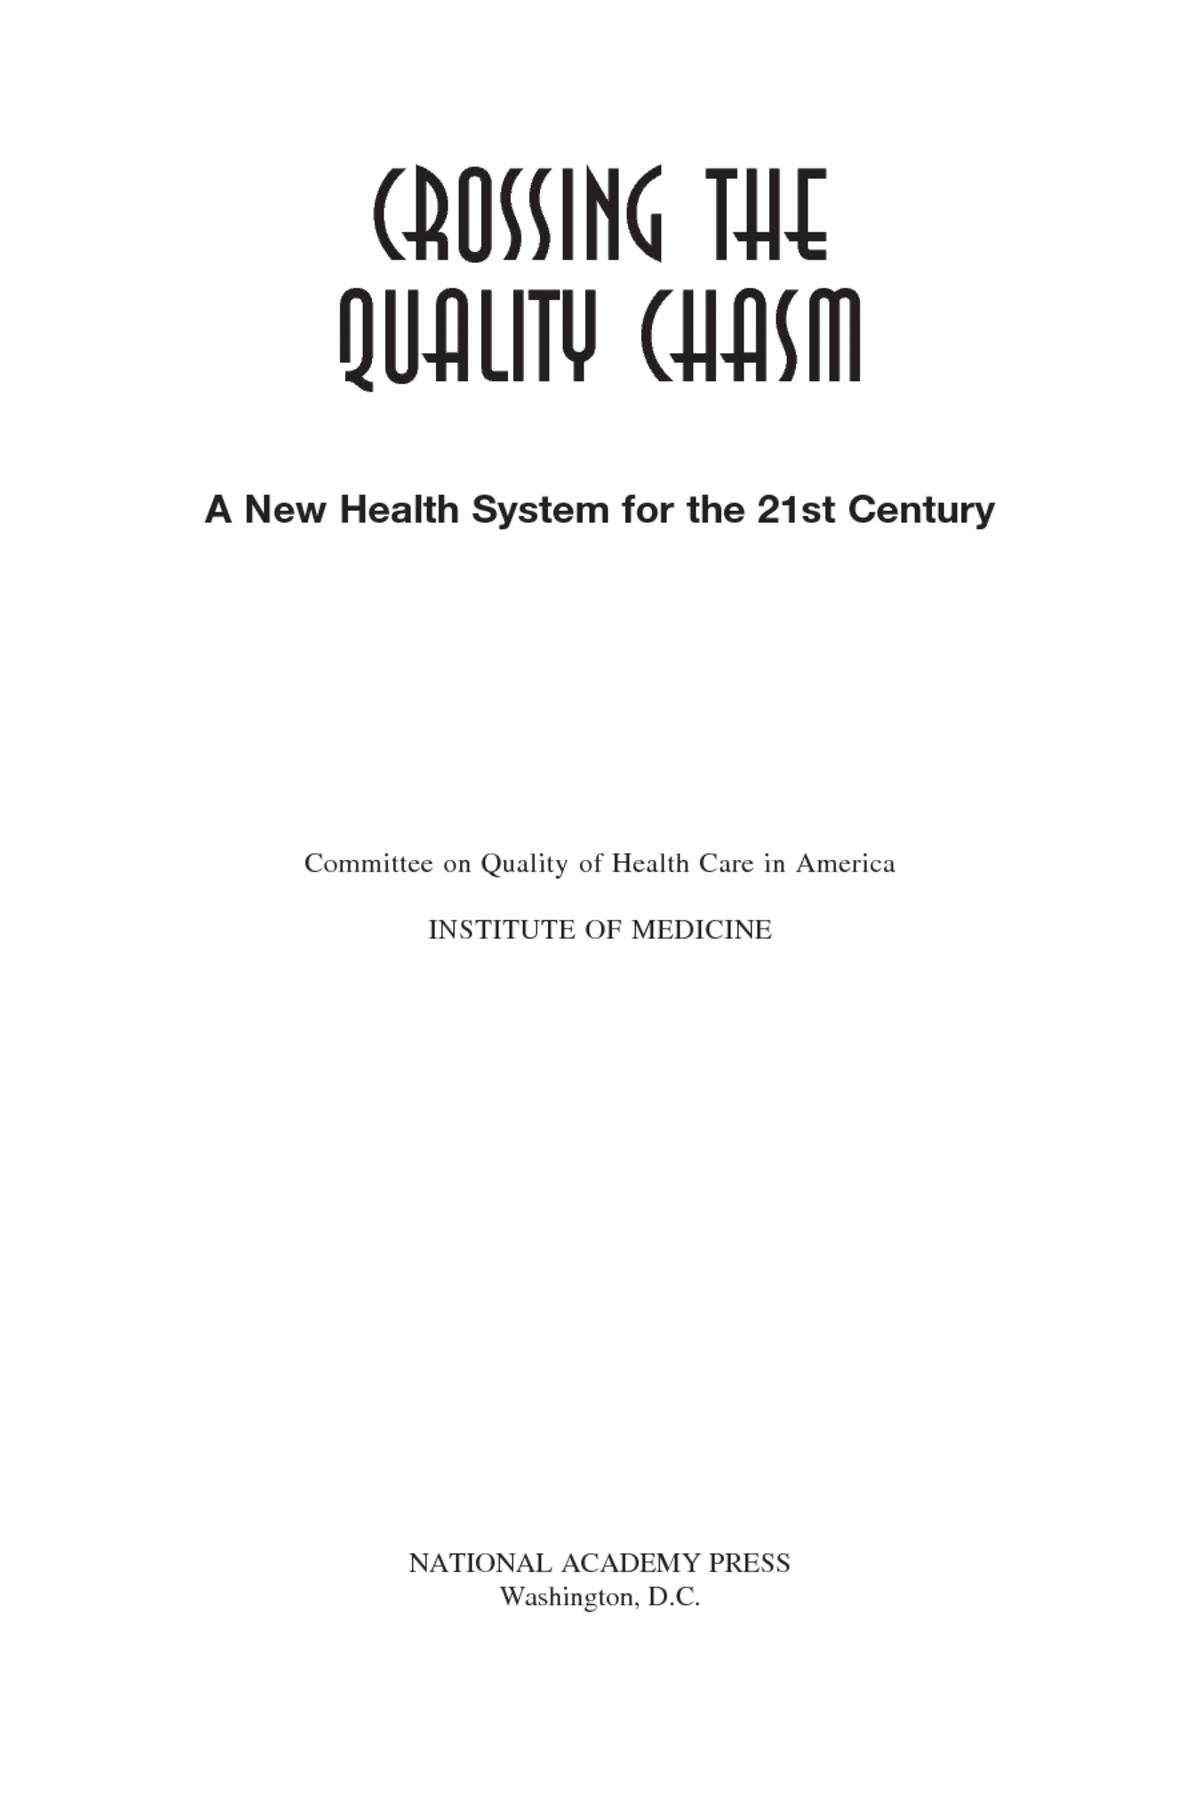 Front Matter | Crossing the Quality Chasm: A New Health System for 